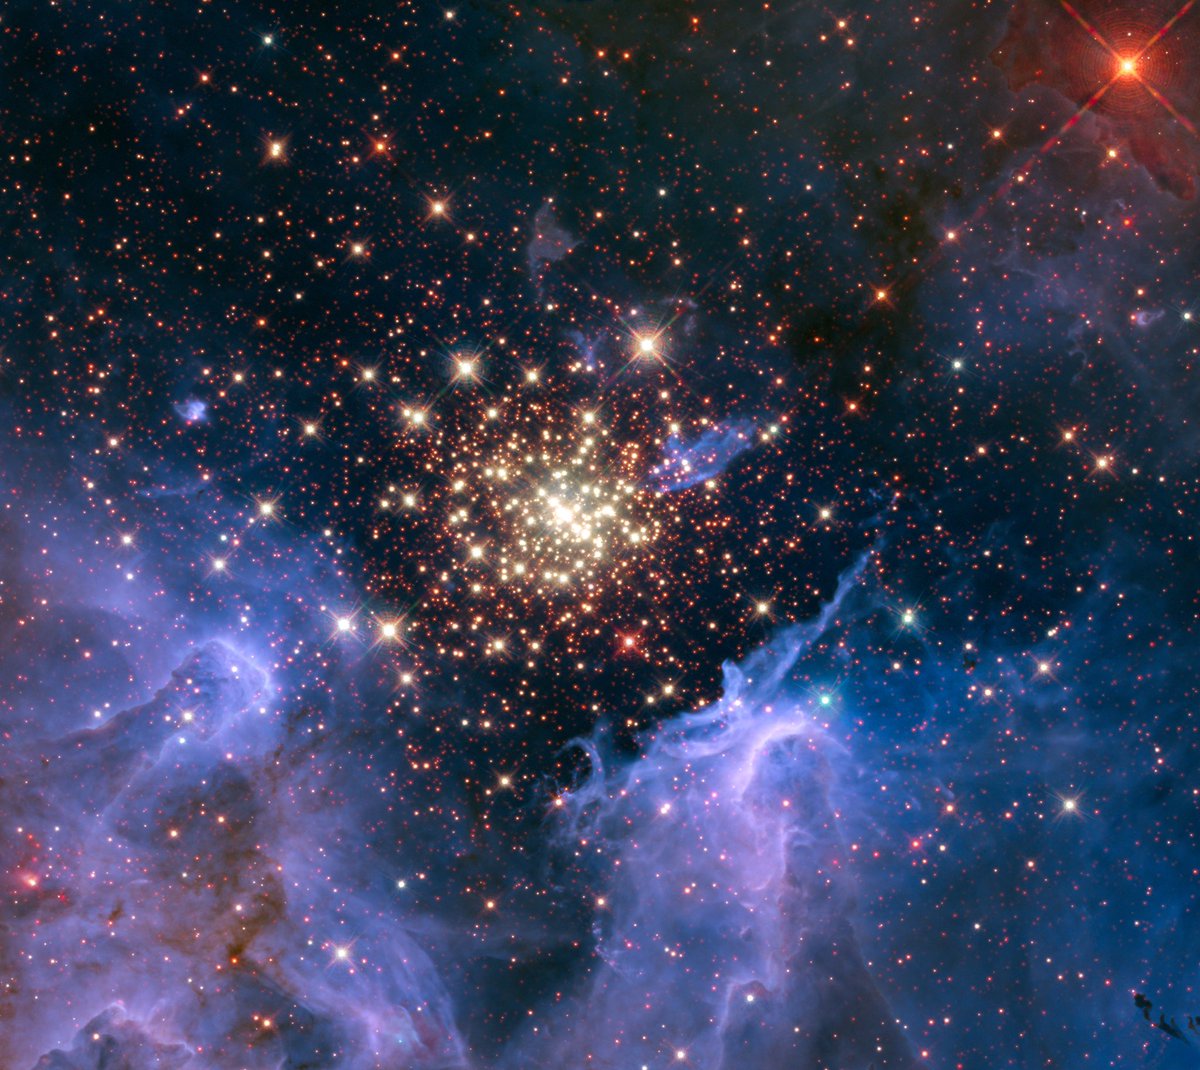 The star cluster NGC 3603, about 20,000 light years away in the constellation Carina.Image: NASA, ESA, R. O'Connell (UVA), F. Paresce (Nat. Inst. for Astrophysics, Bologna), E. Young (USRA/Ames Research Center), WFC3 Science Oversight Committee, Hubble Heritage Team (STScI/AURA)